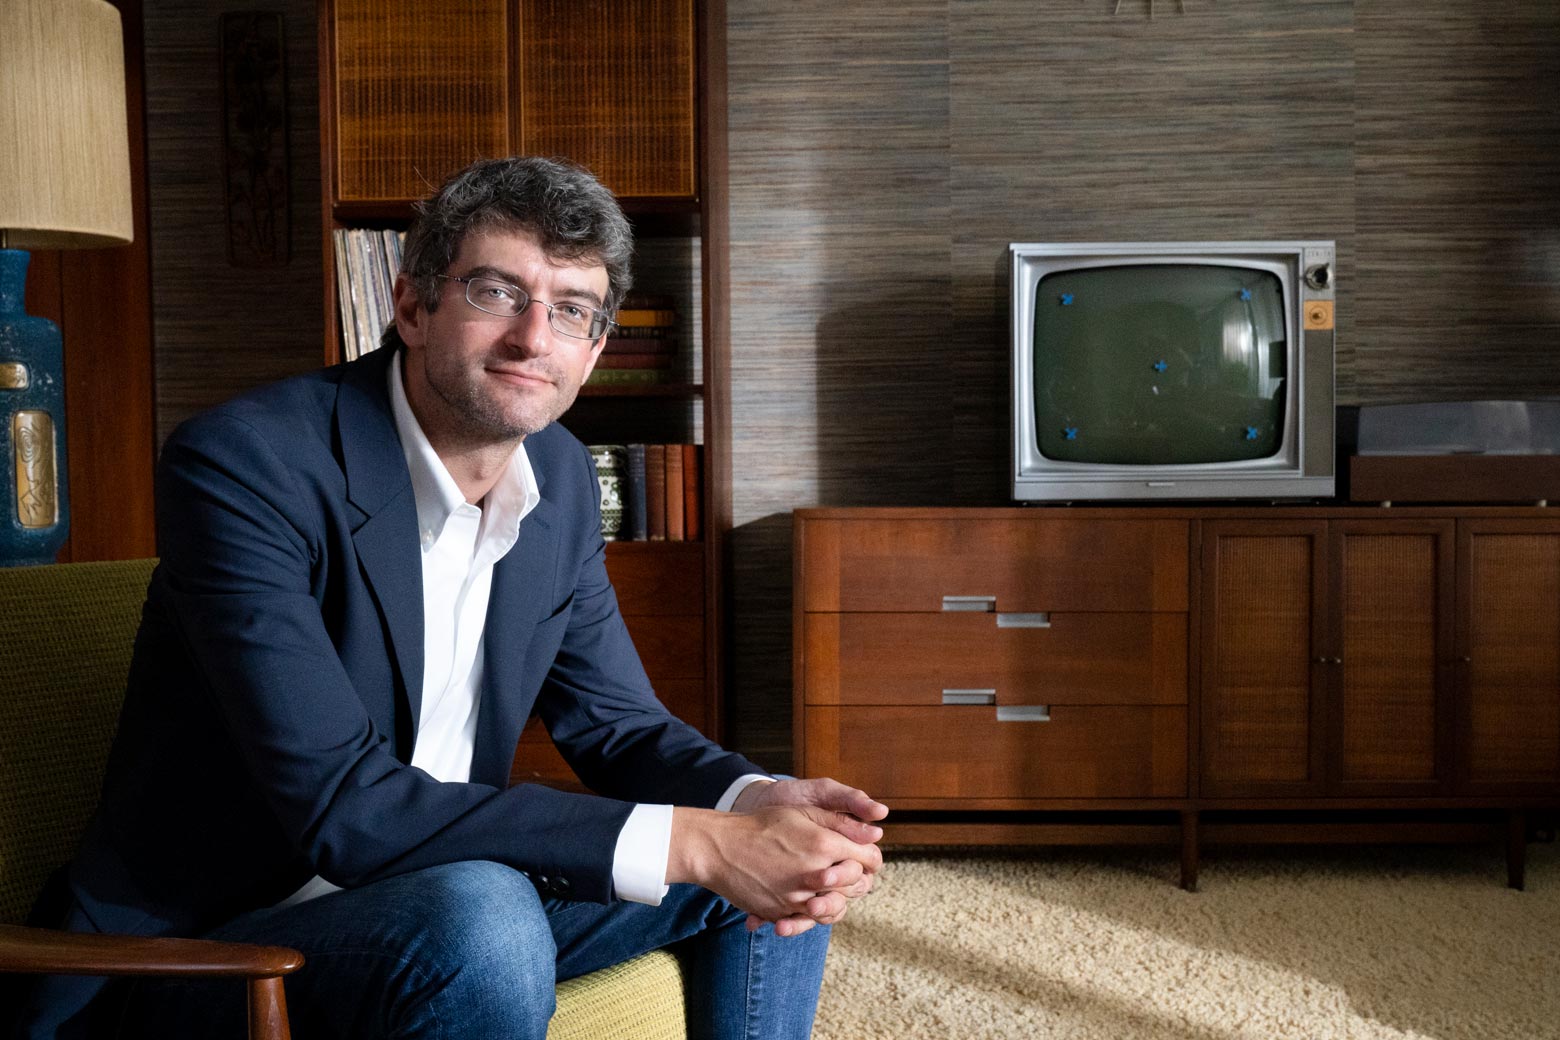 Leon Neyfakh sits in a chair in front of a credenza and old-fashioned TV.